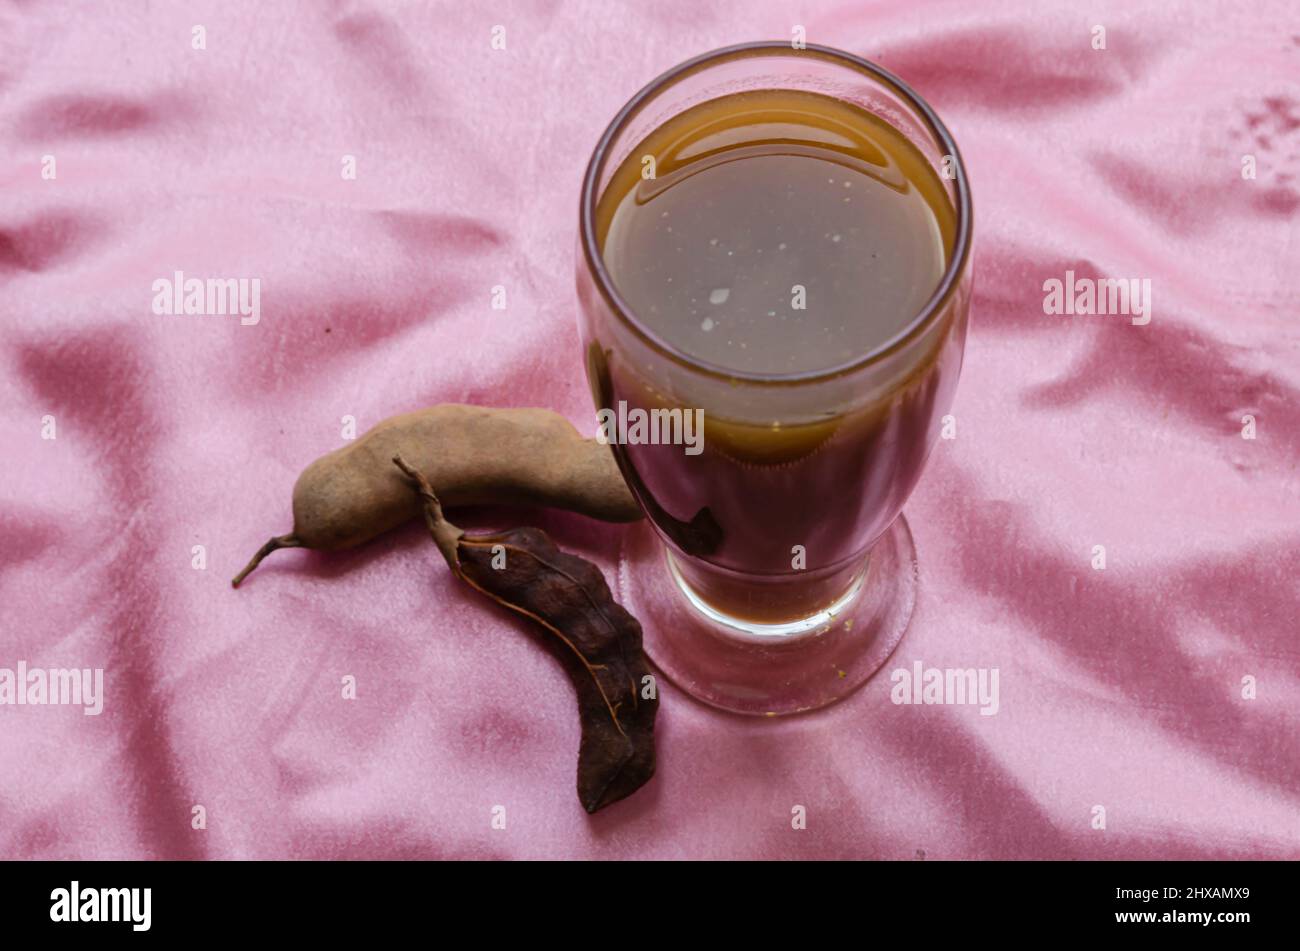 Drinking Glass With Tamarind Juice On Pink Background Stock Photo